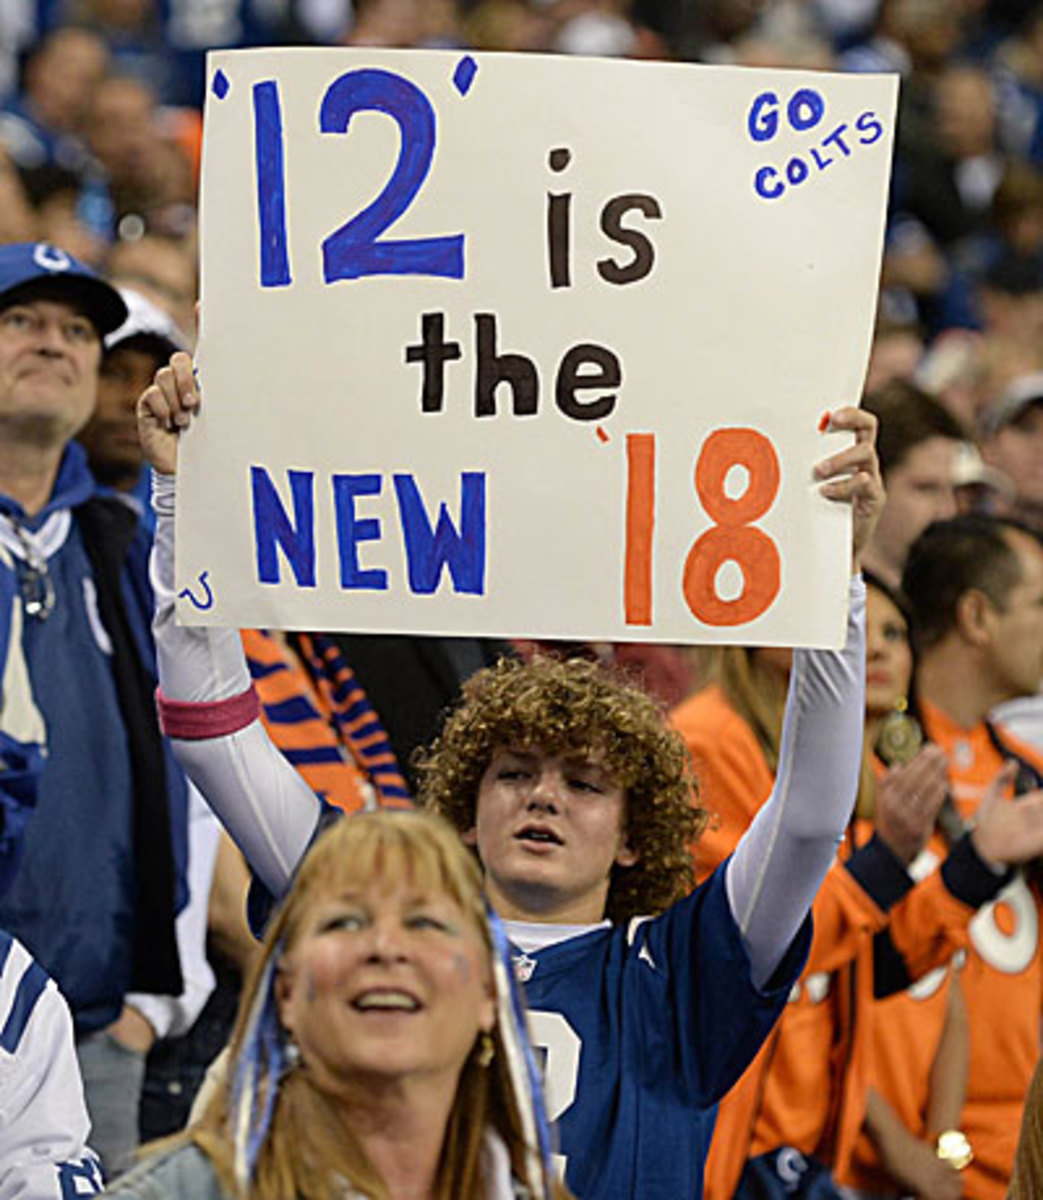 Colts fans gave Peyton Manning a warm reception, but they're firmly behind Andrew Luck now. (Ron Chenoy/USA Today Sports)